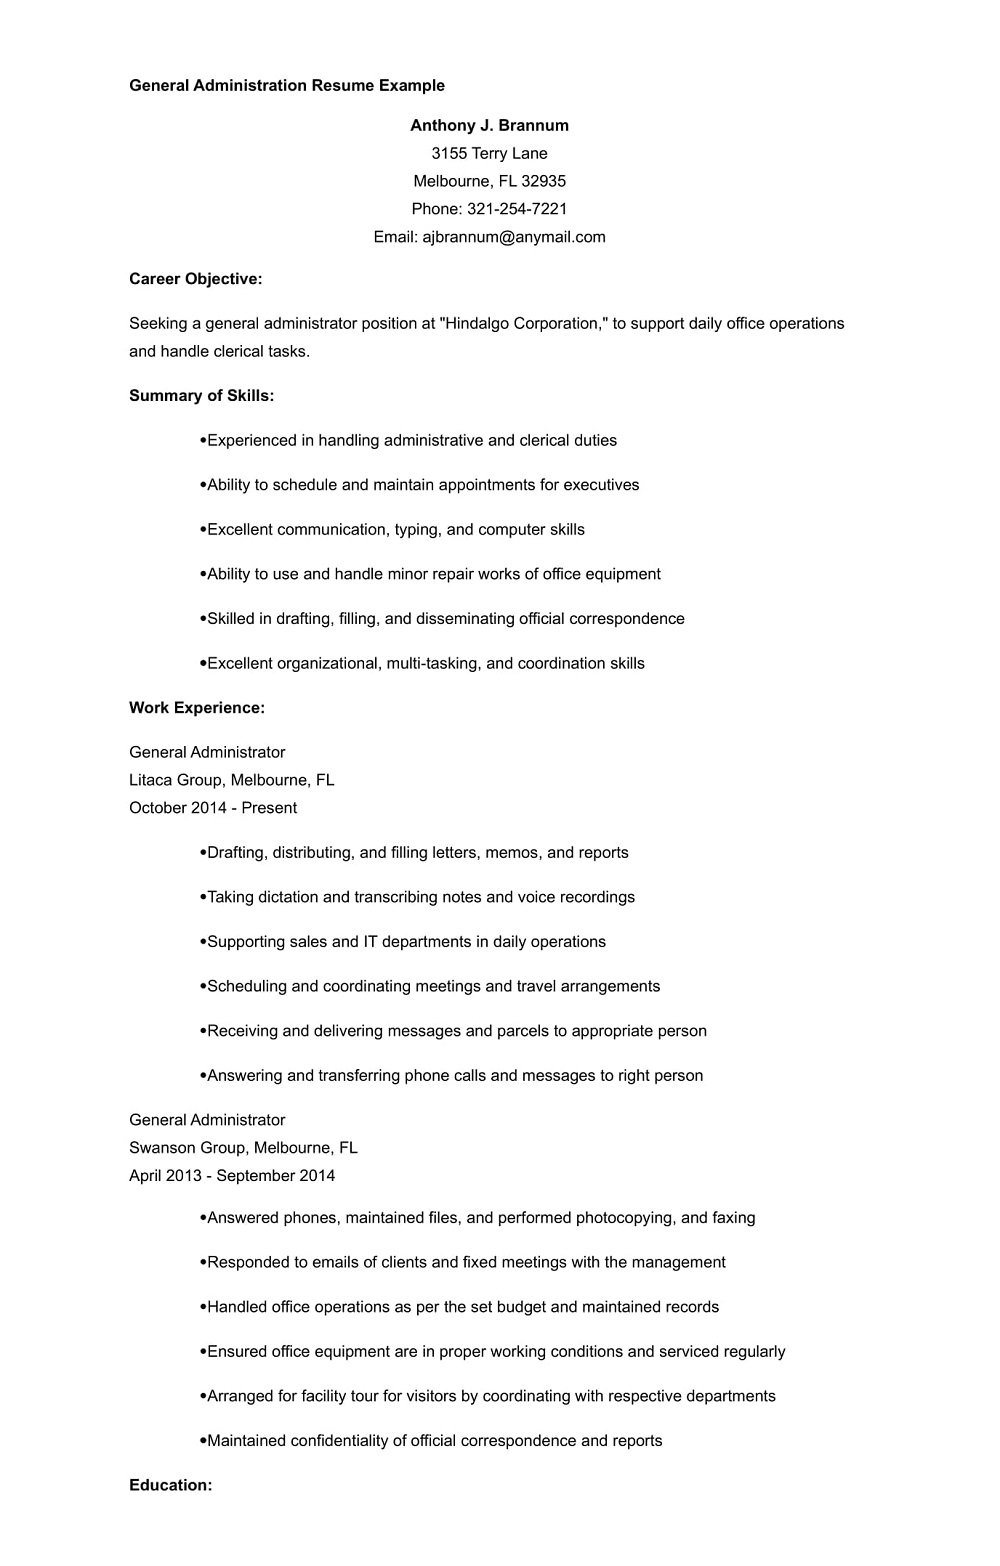 General Administration Resume Template